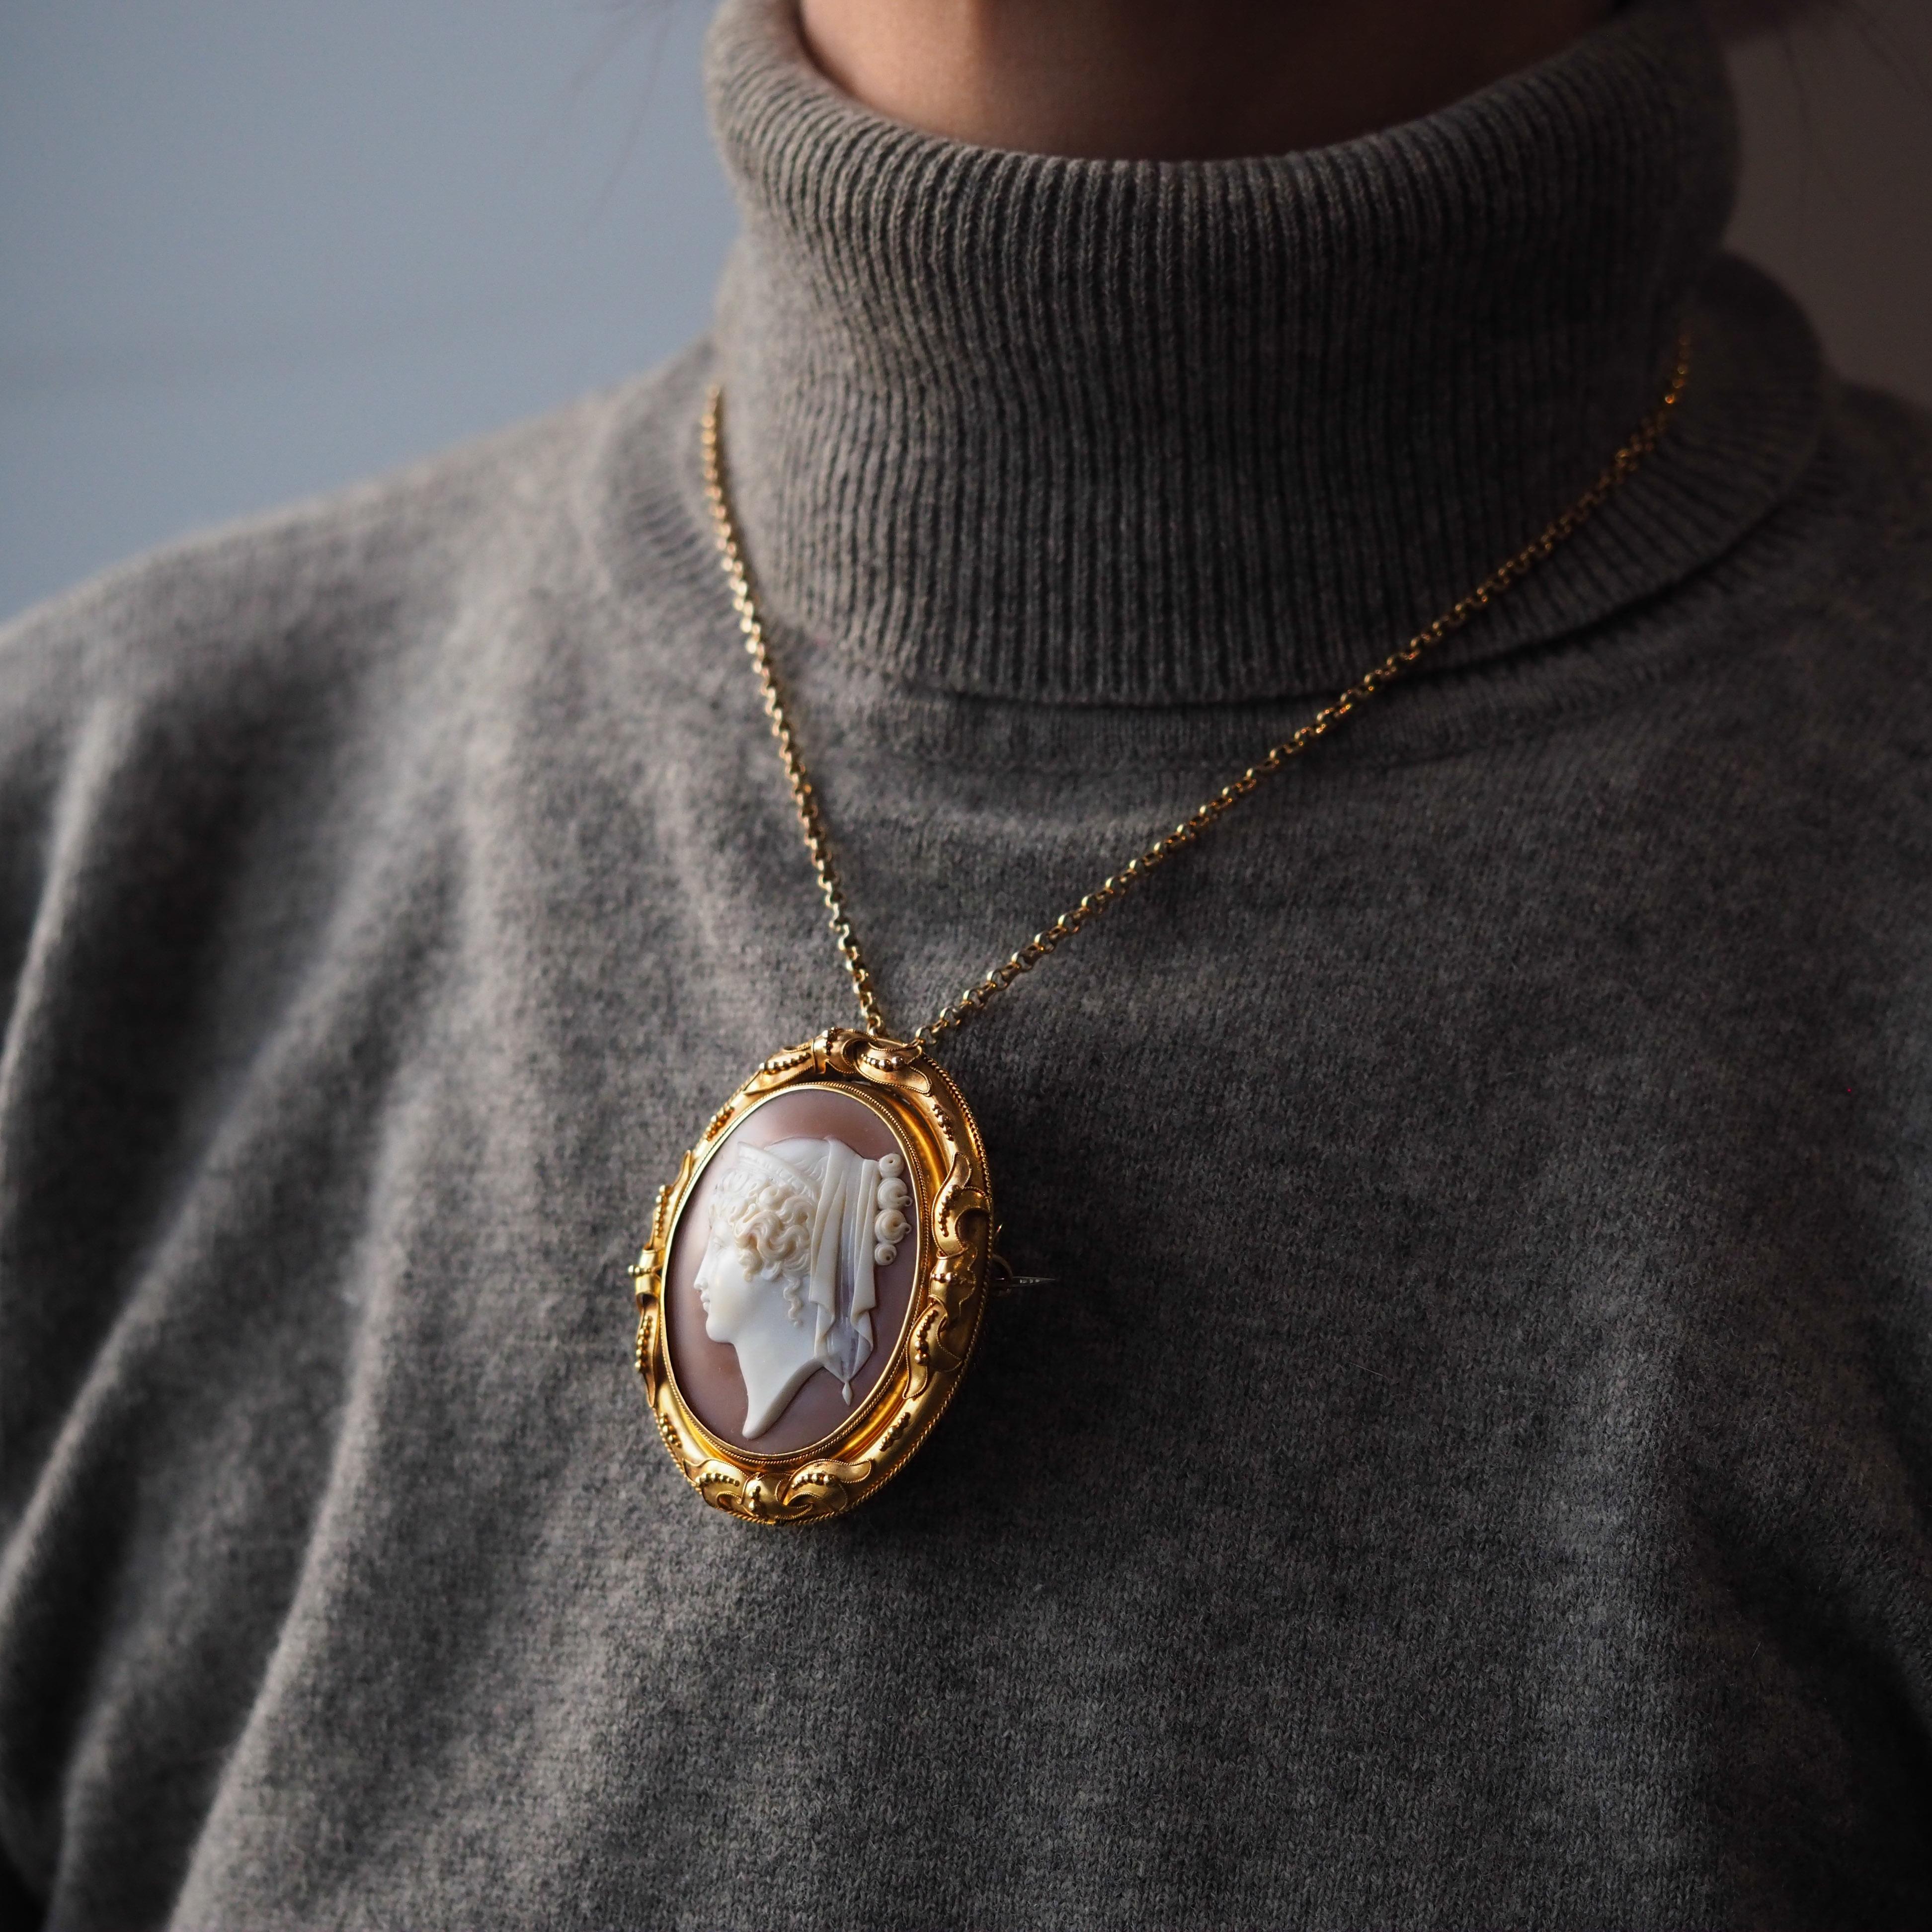 Antique Cameo Brooch Pendant Necklace 18K Gold - Victorian c.1860 For Sale 14